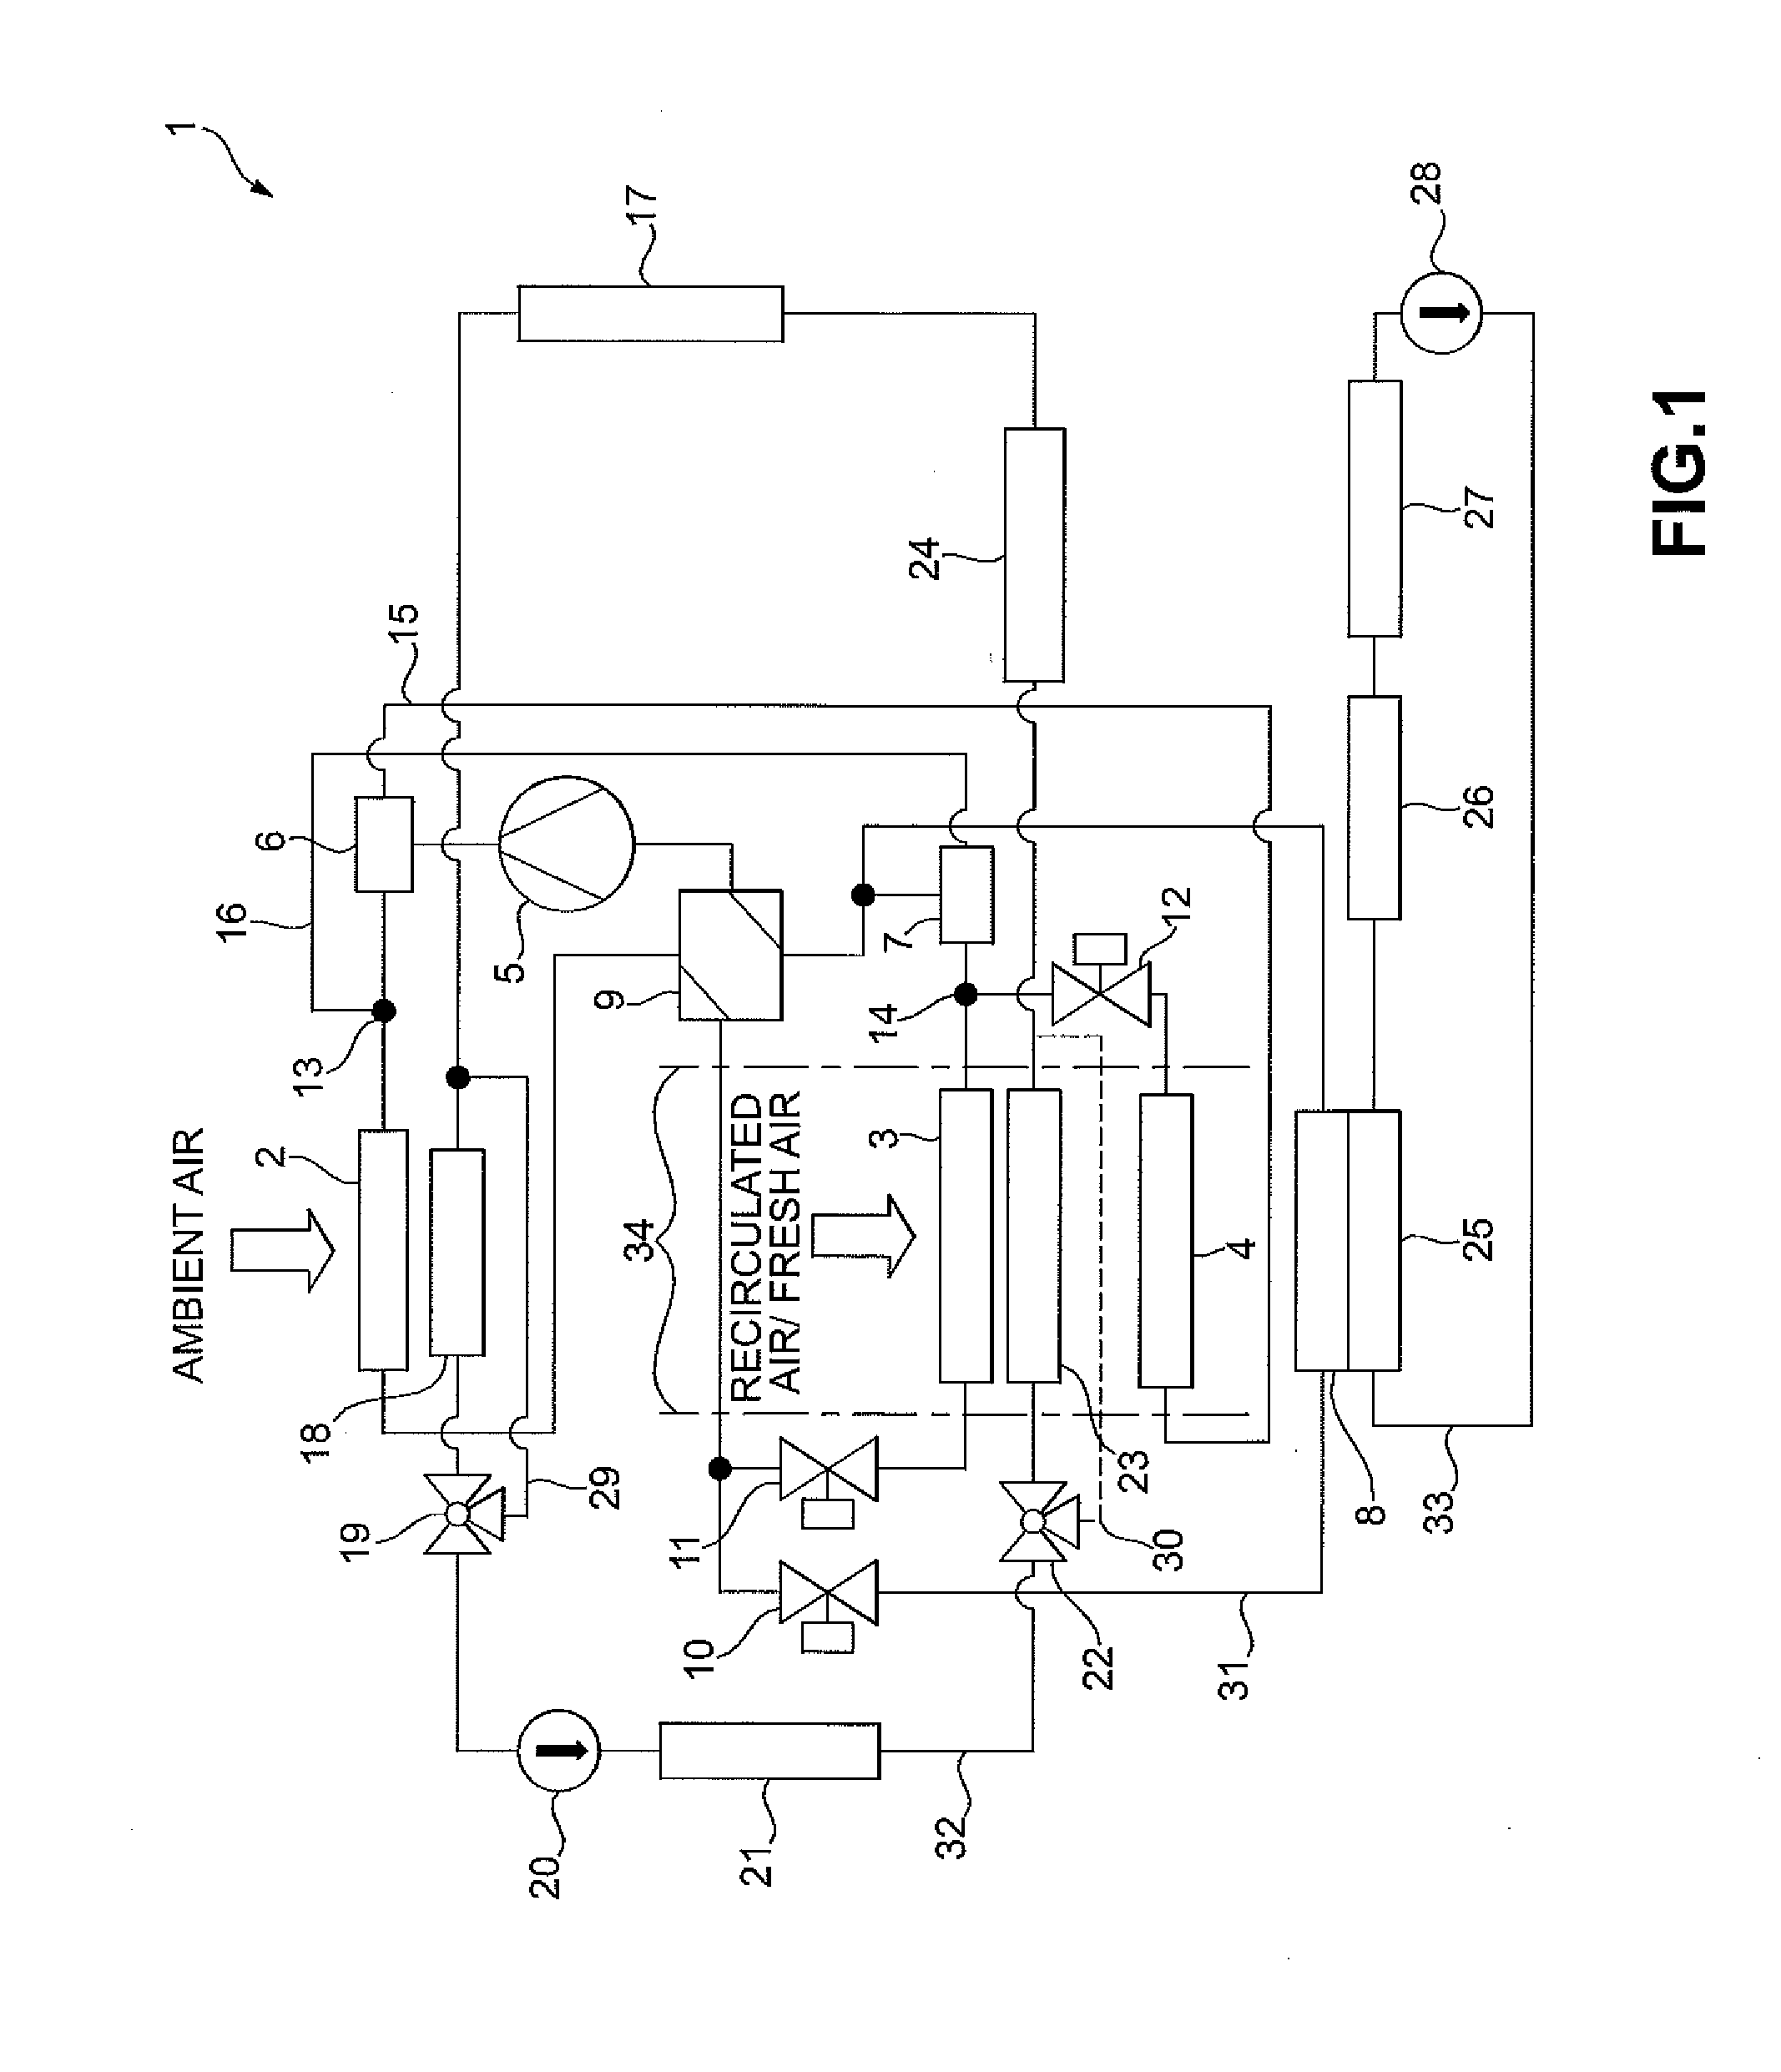 Method for operation of an HVAC system